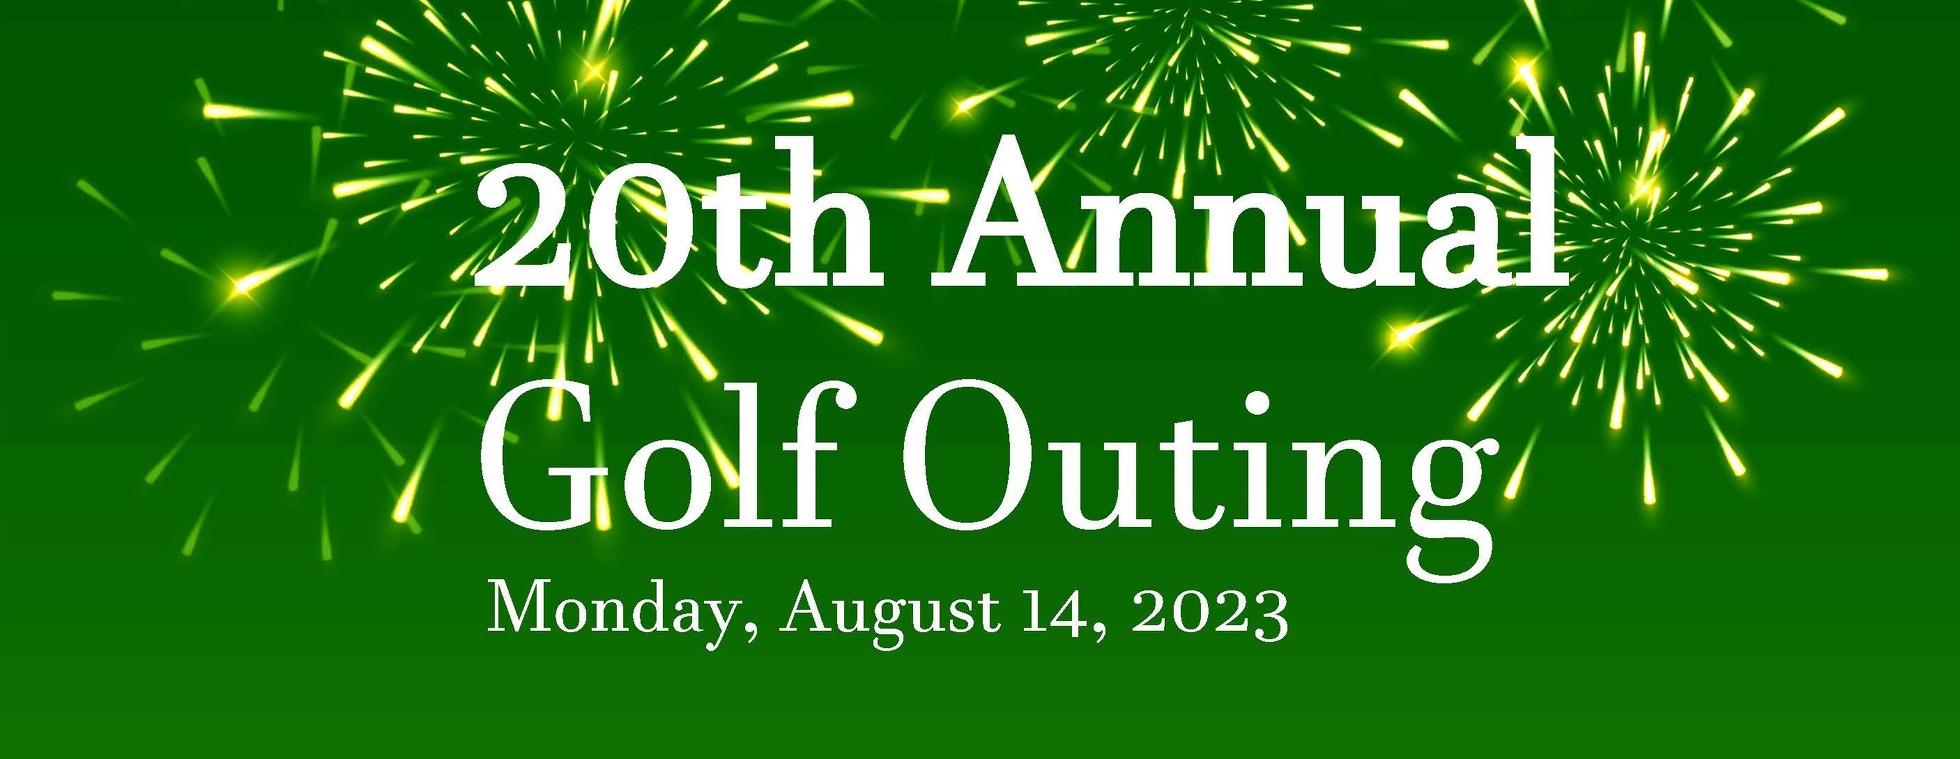 20th Annual Golf Outing